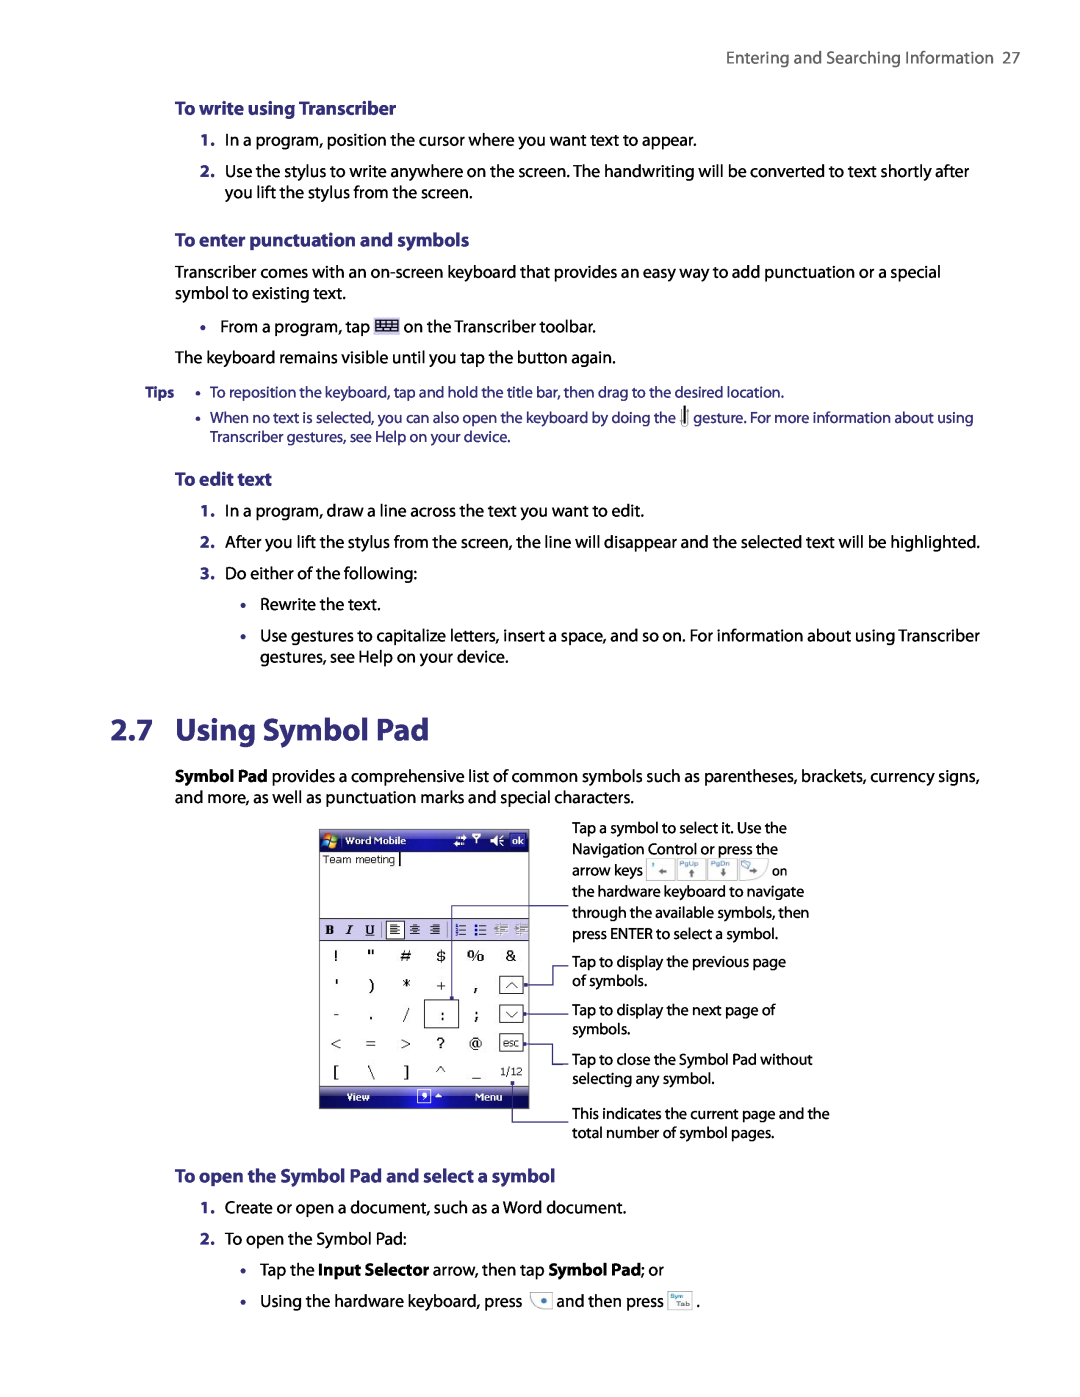 HTC PDA Phone user manual Using Symbol Pad, To write using Transcriber, To enter punctuation and symbols, To edit text 